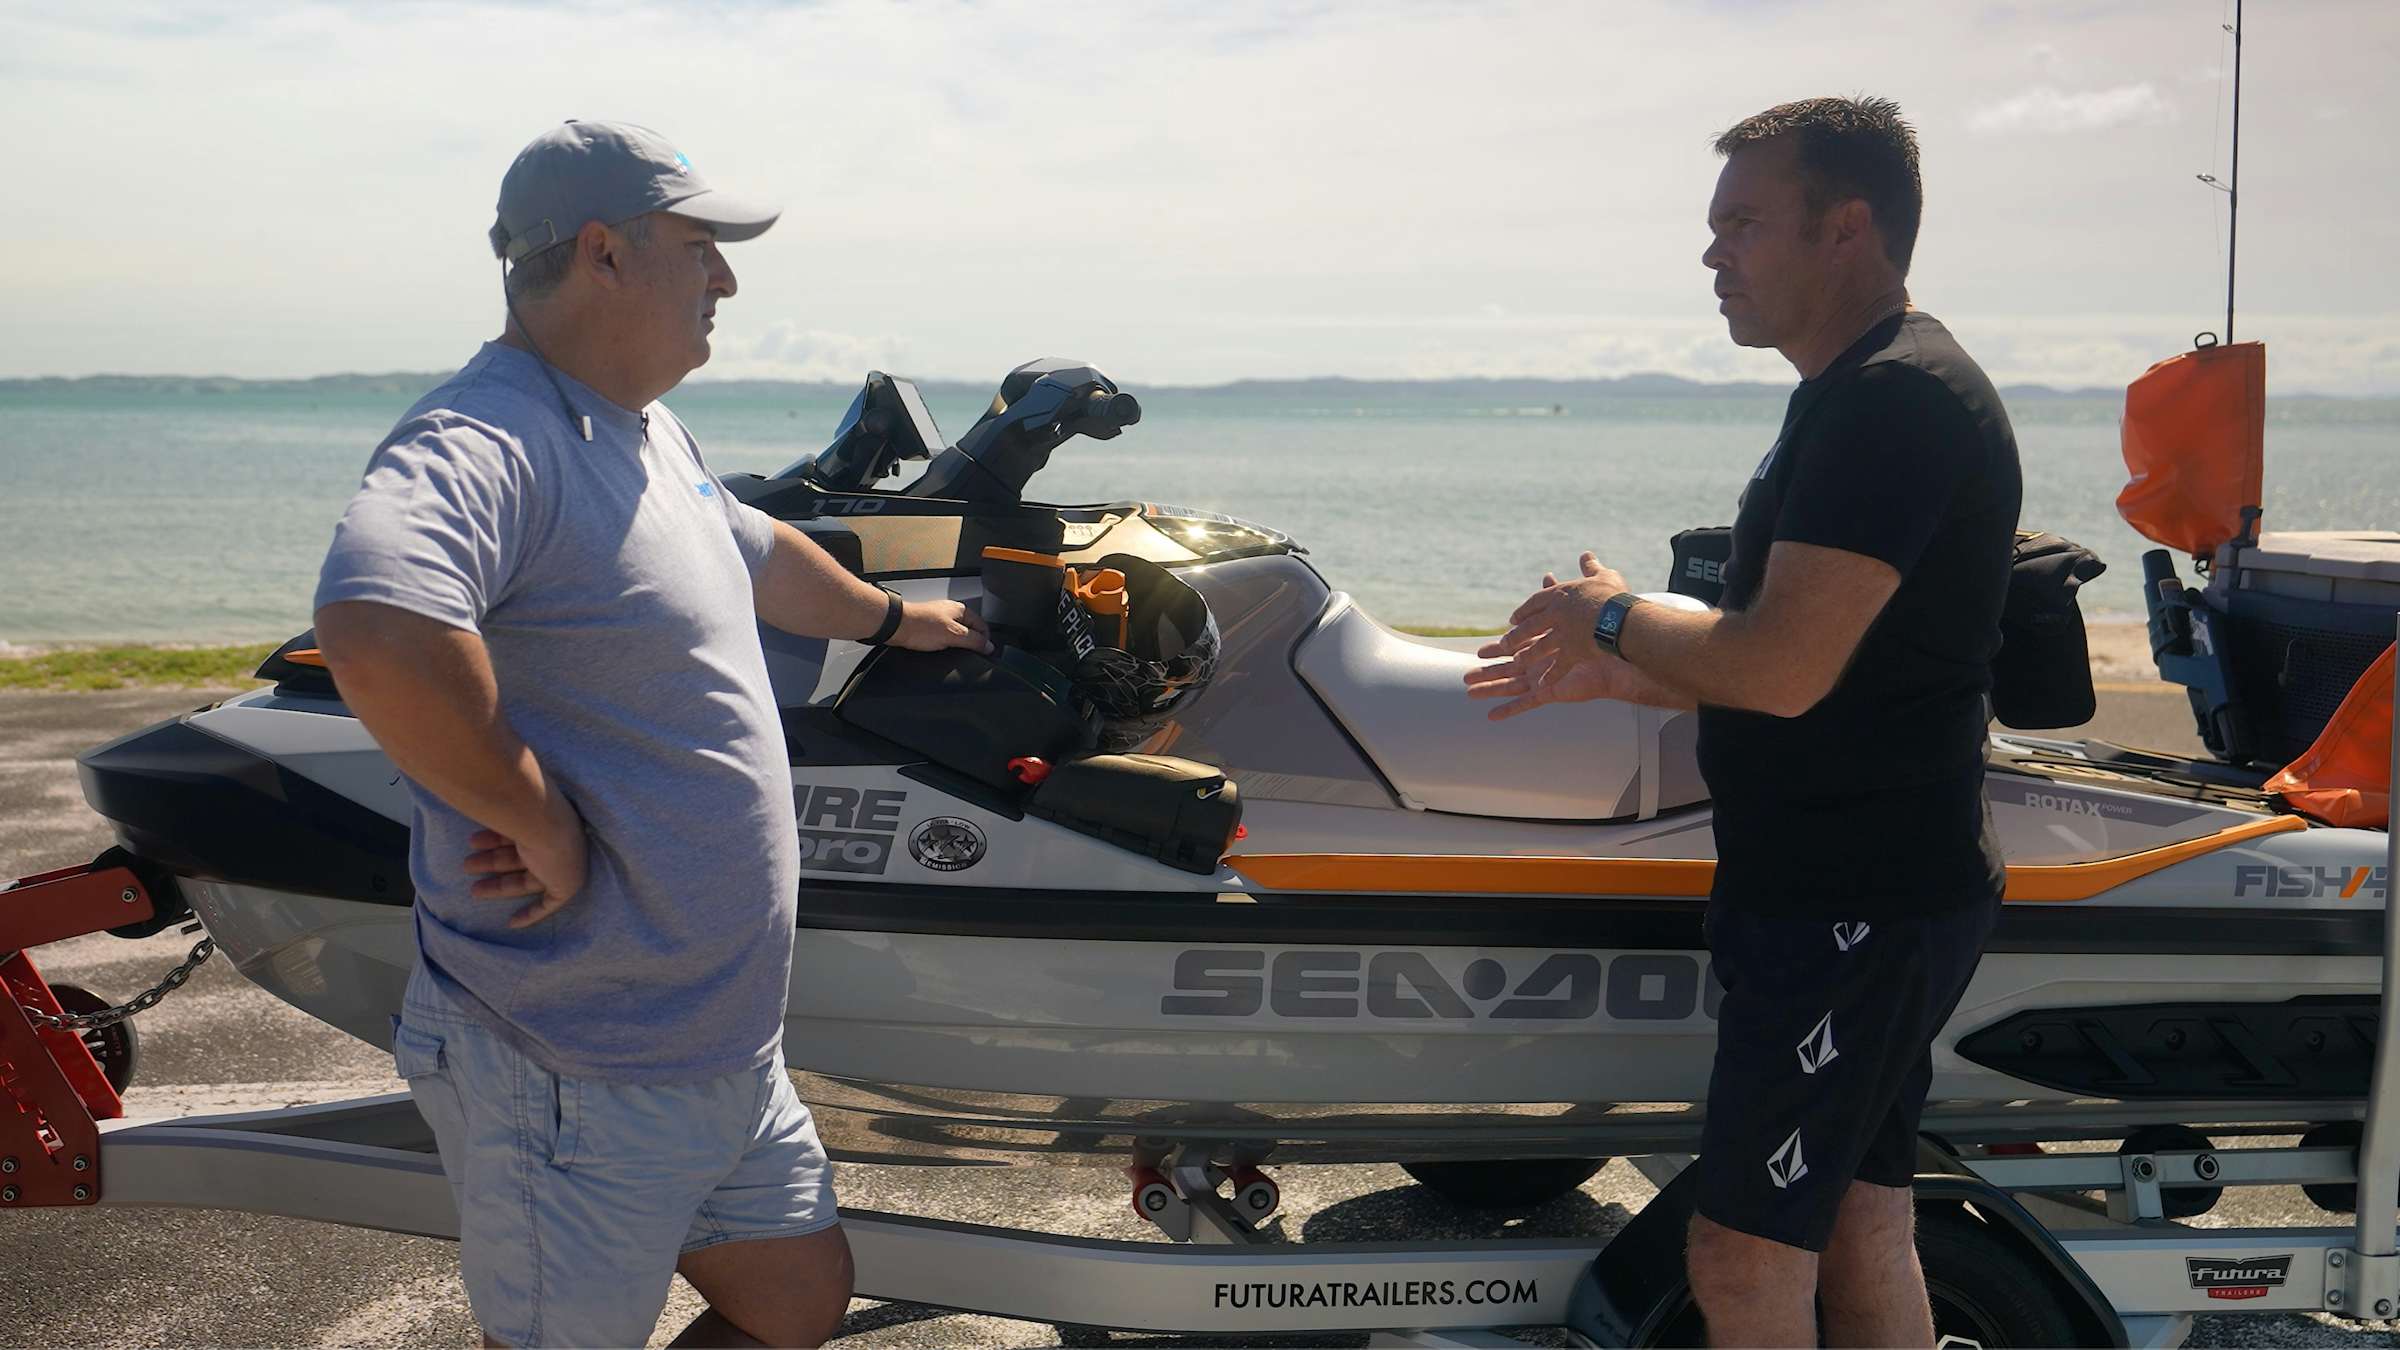 Andrew Hill shows Aaron Mortimer the Sea-Doo Fish Pro Trophy jet ski